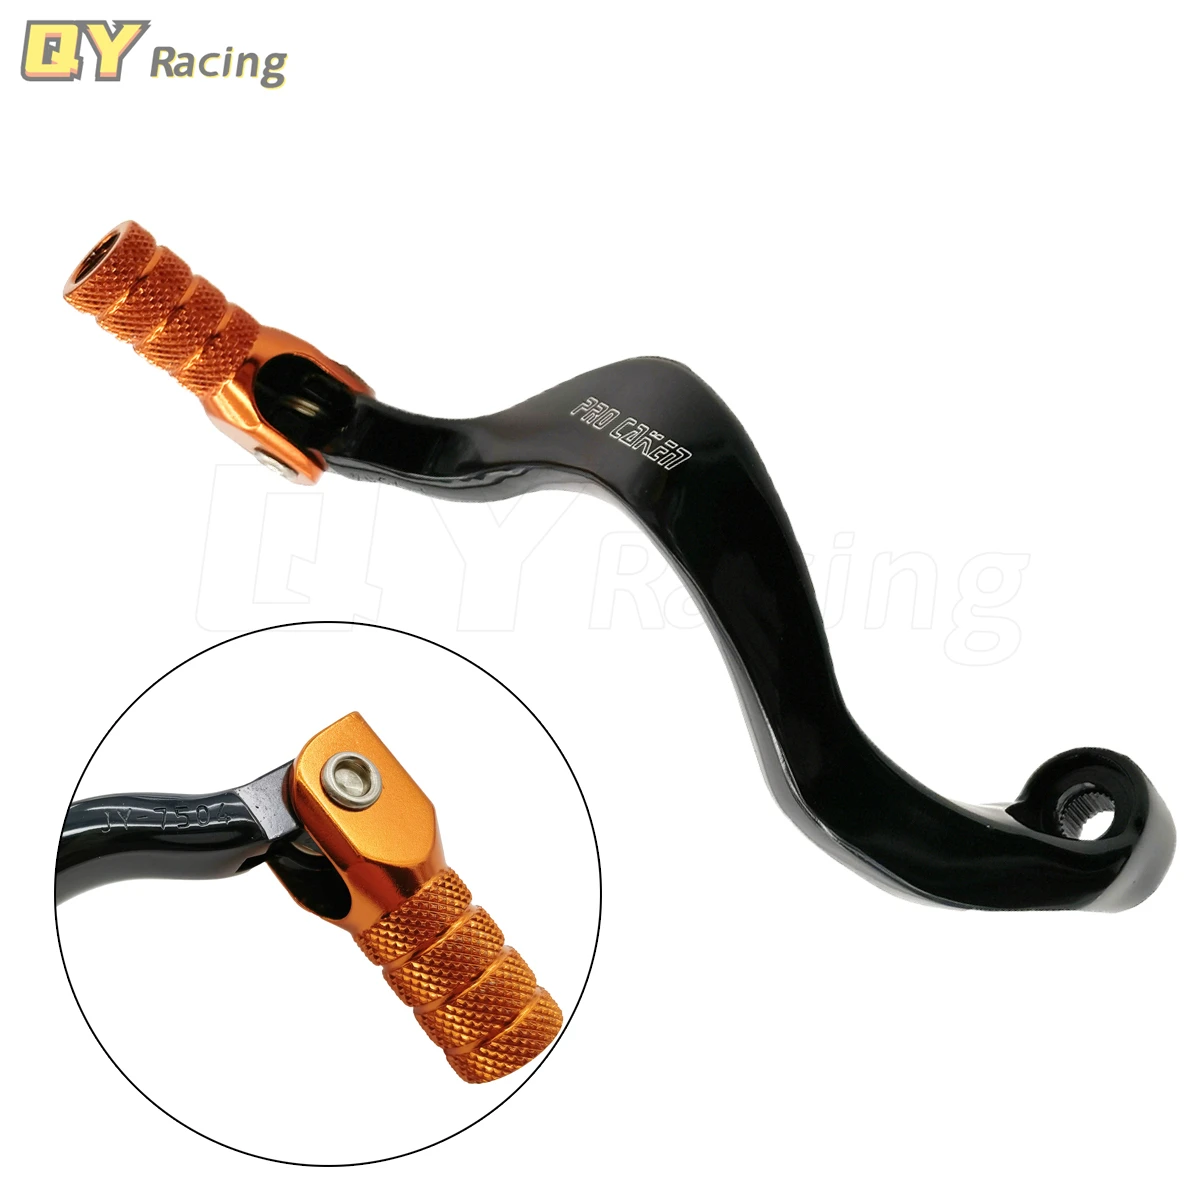 

CNC Gear Shifter Shift Lever Pedal Motorcycle For KTM Adventure S 950 990 1190 2003-2018 MX Motocross Motorbike Dirt Pit Bikes